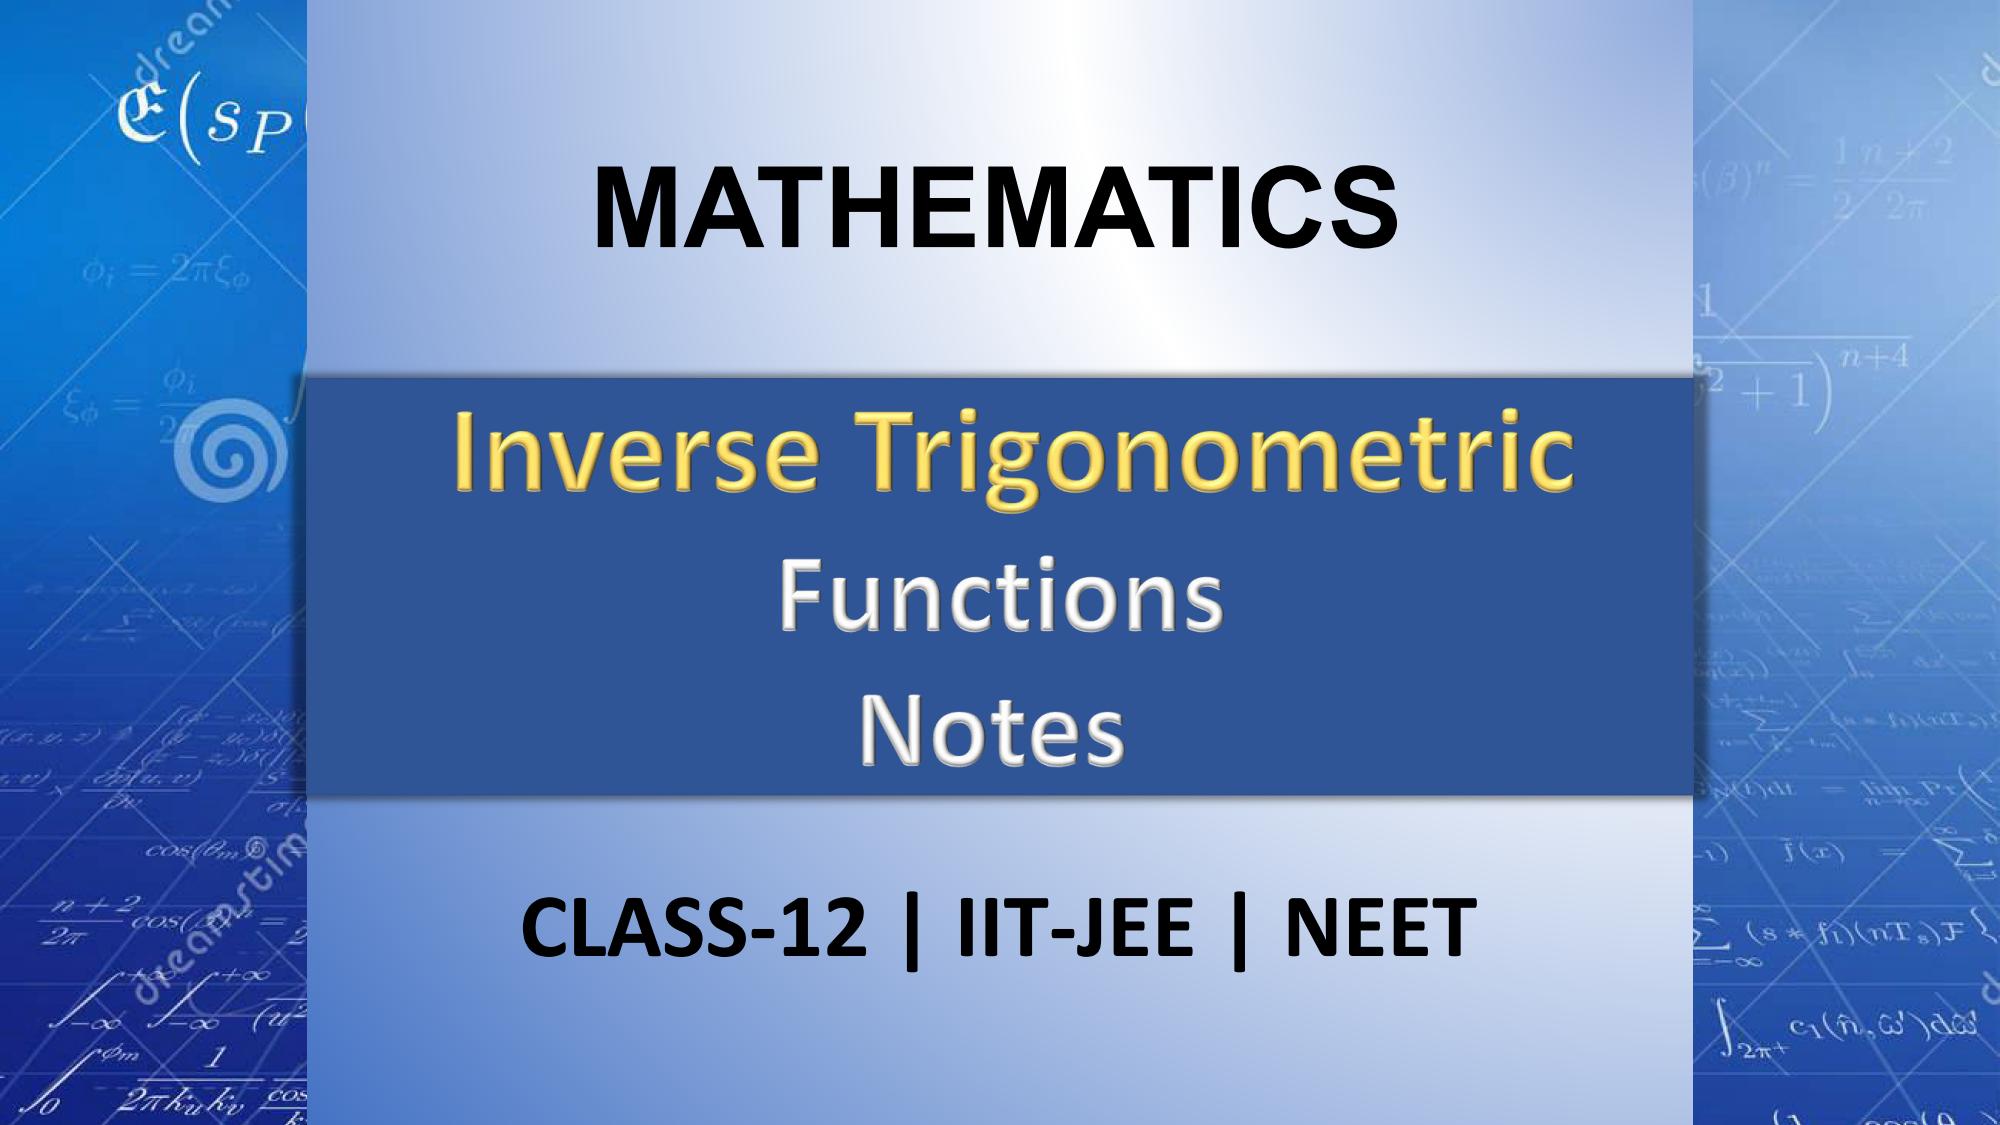 Inverse Trigonometric Function Notes for Class 12 and IIT JEE